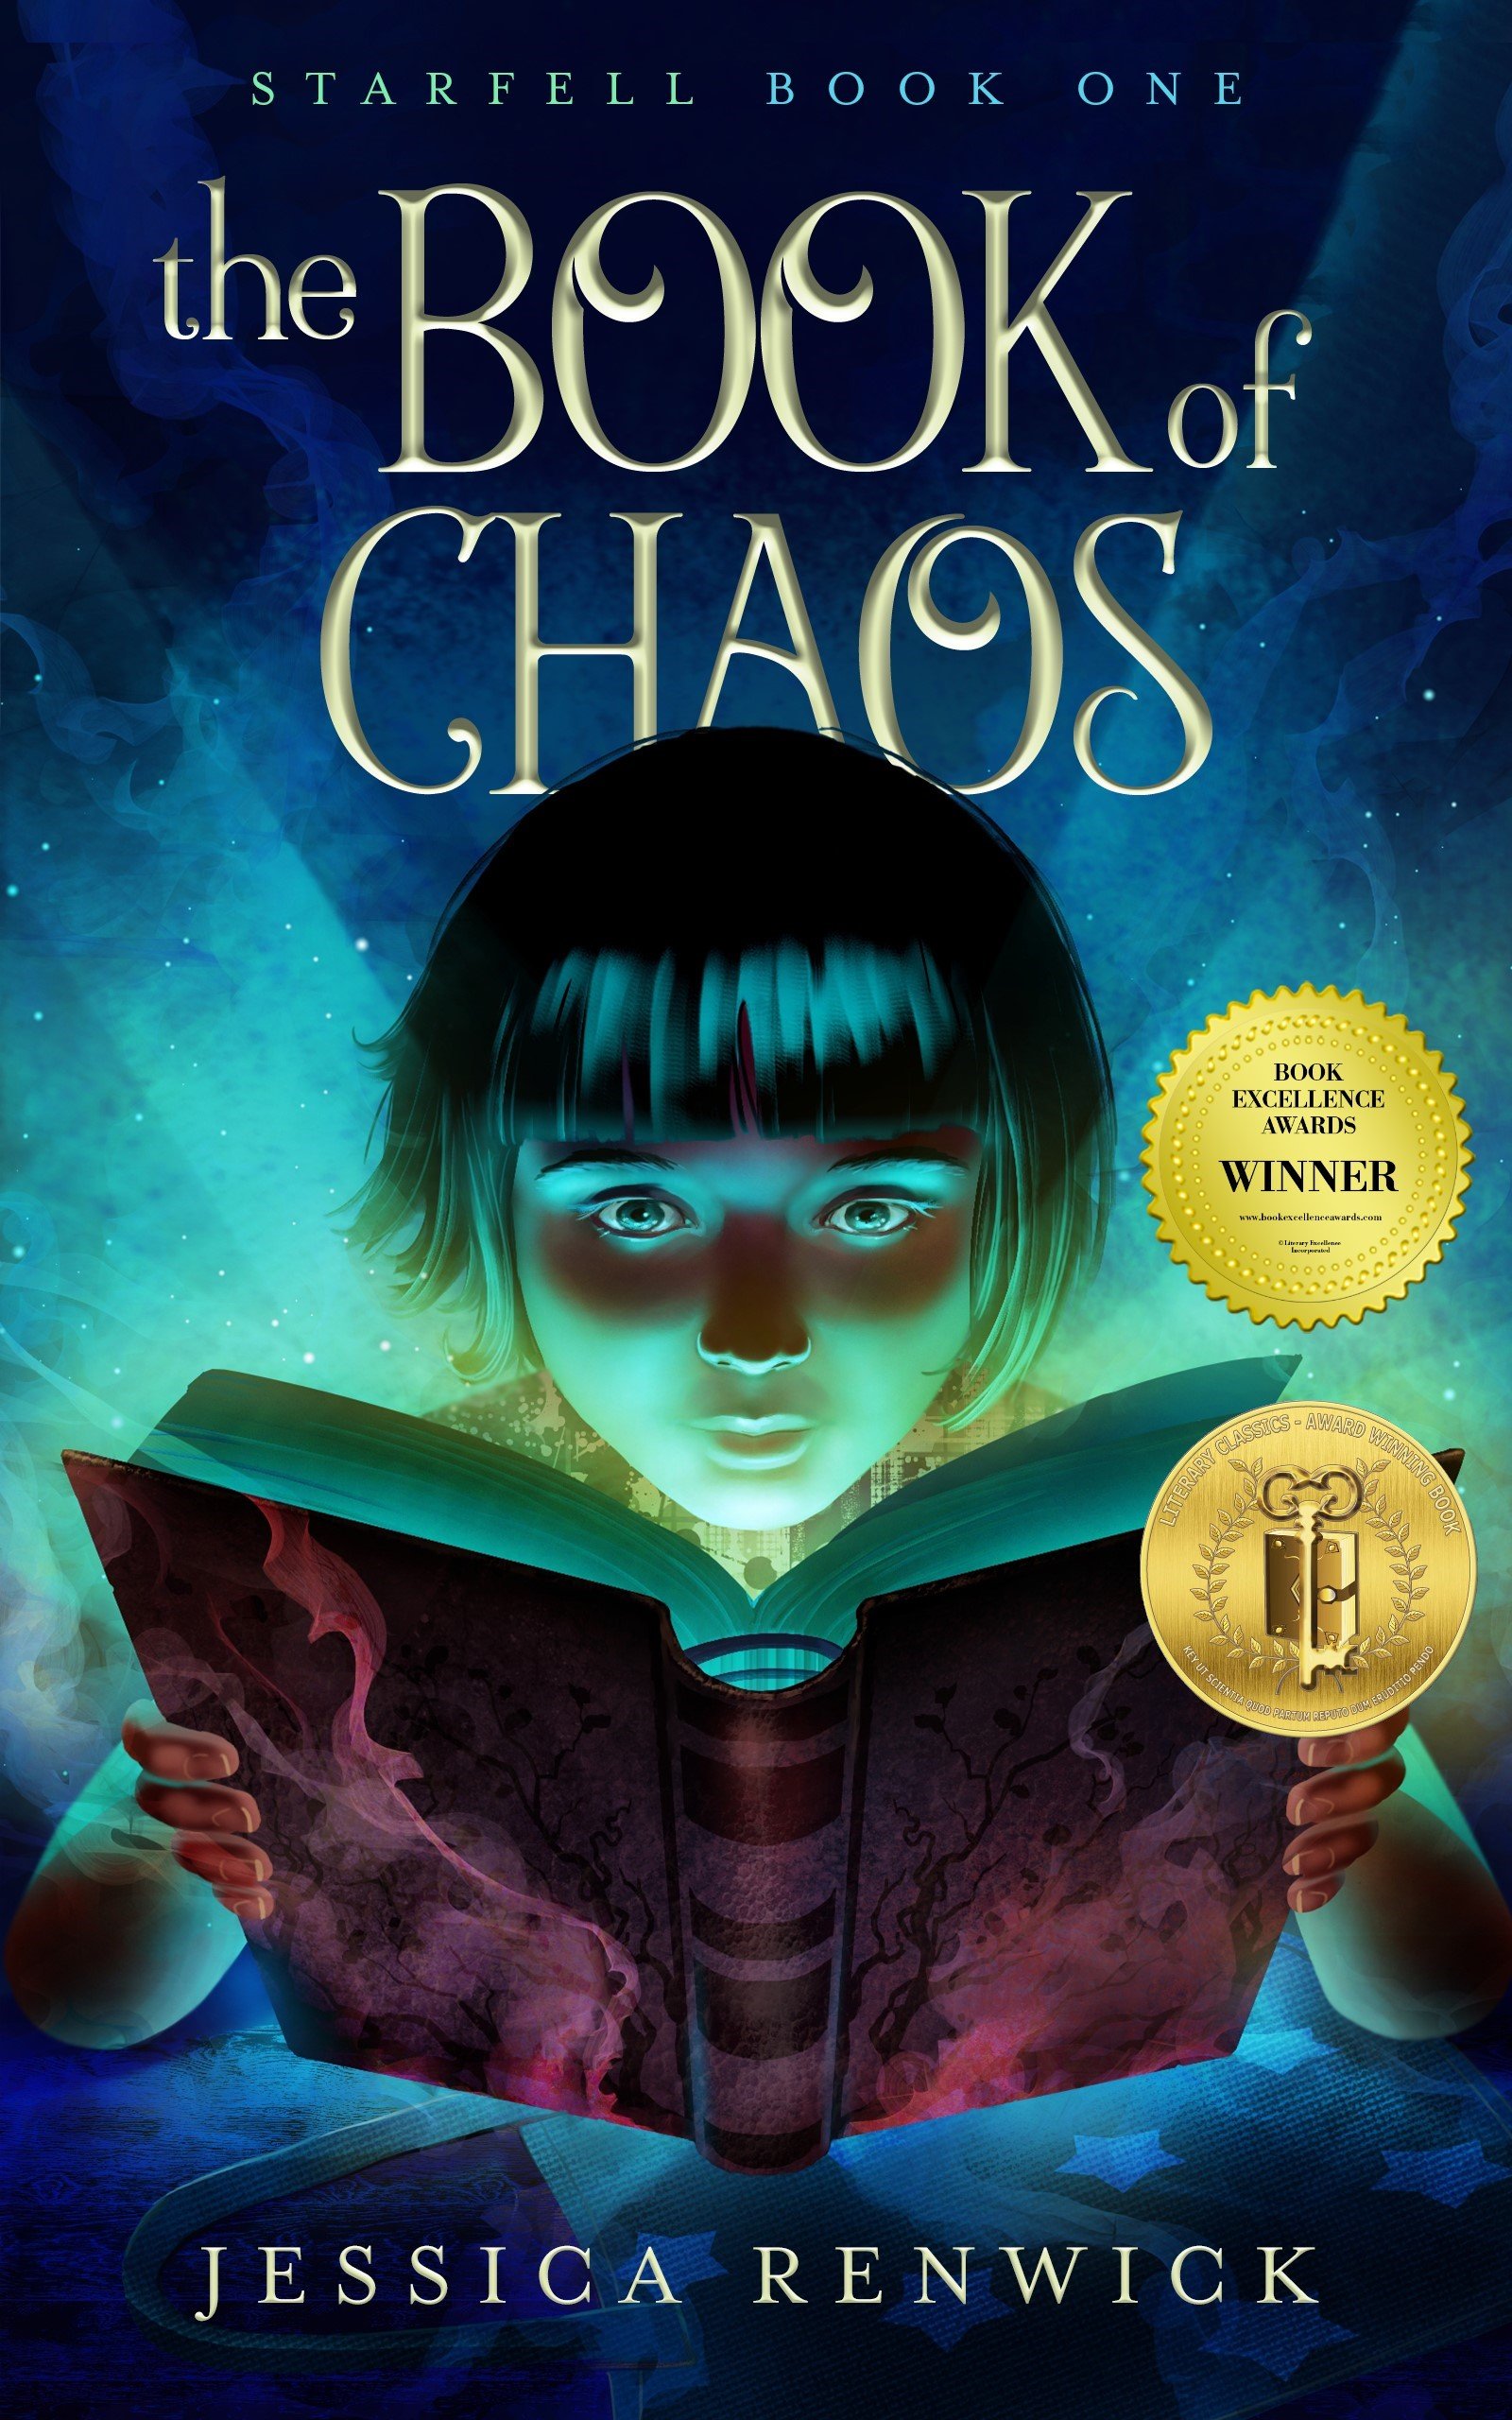 The Book of Chaos (Starfell Book 1) by Jessica Renwick (Copy)